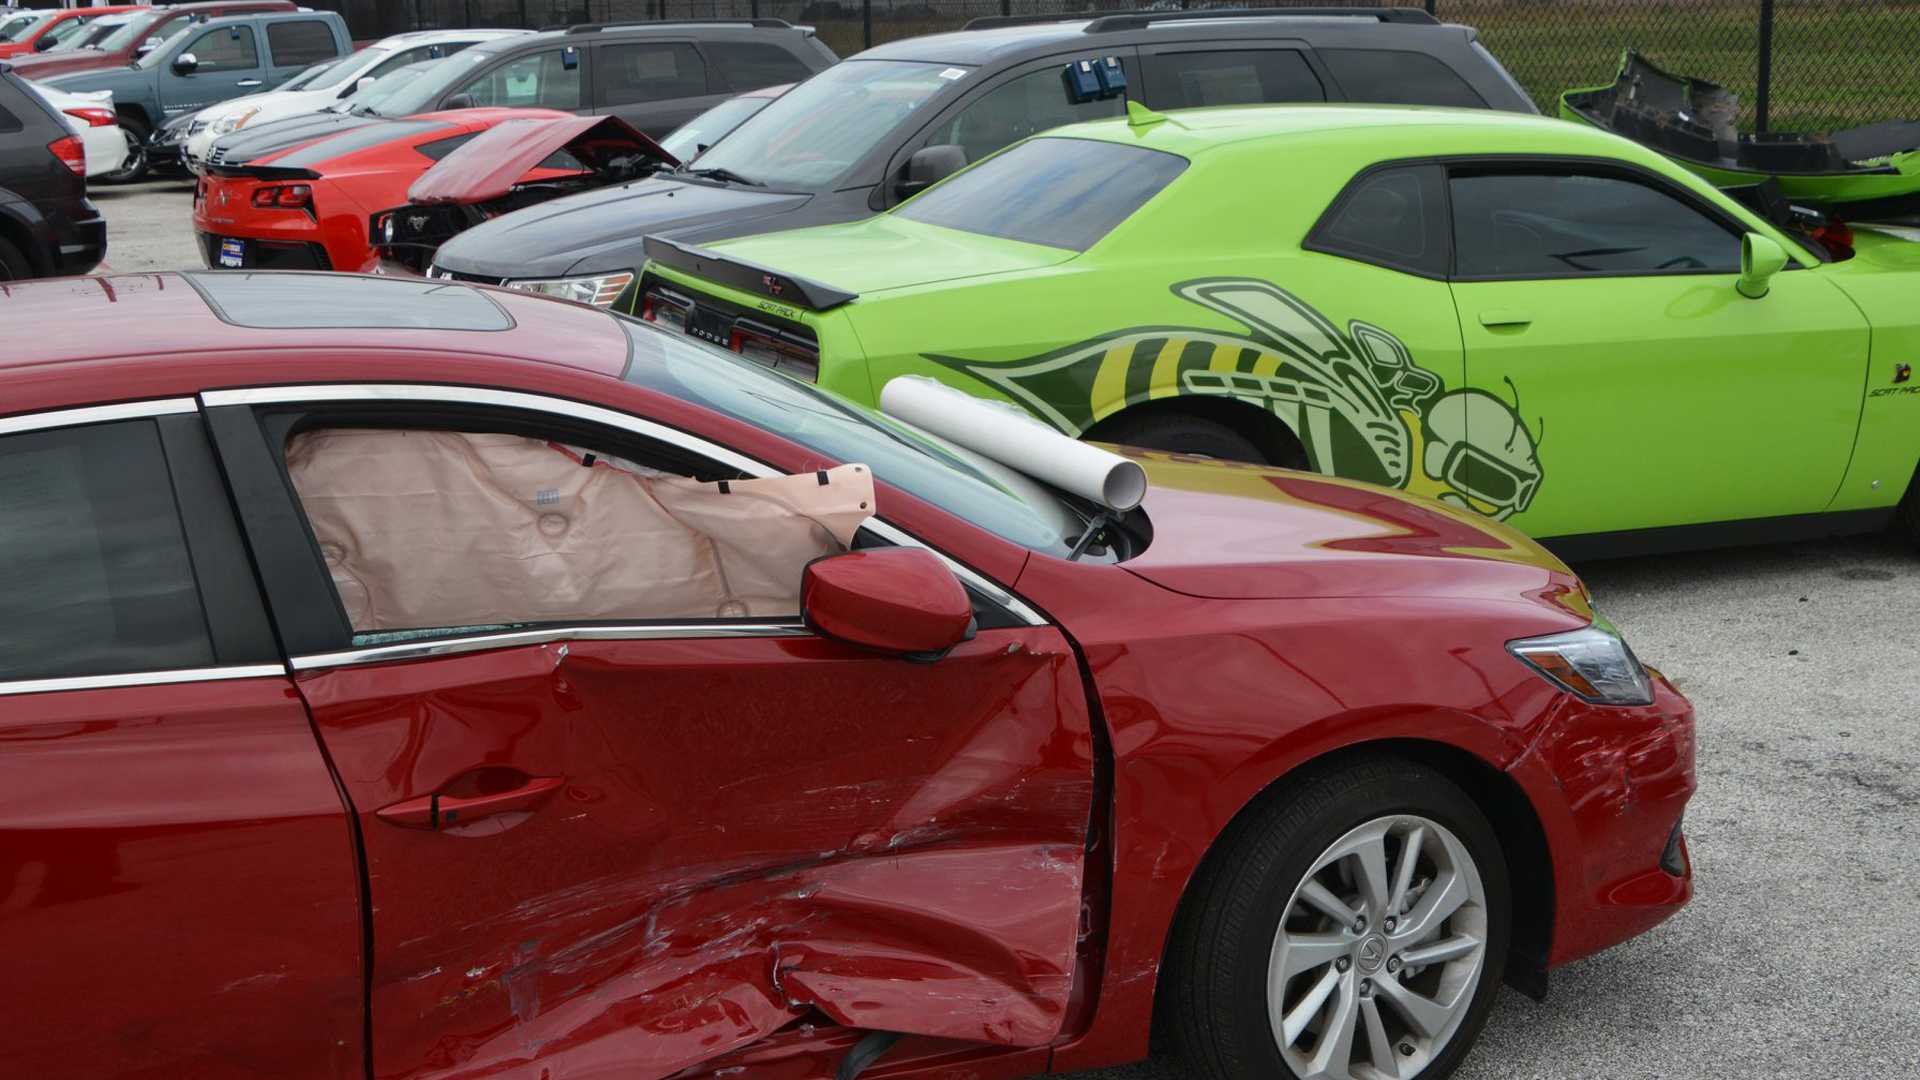 Naughty Kids Do Nearly 1m In Damage At Houston Car Dealer